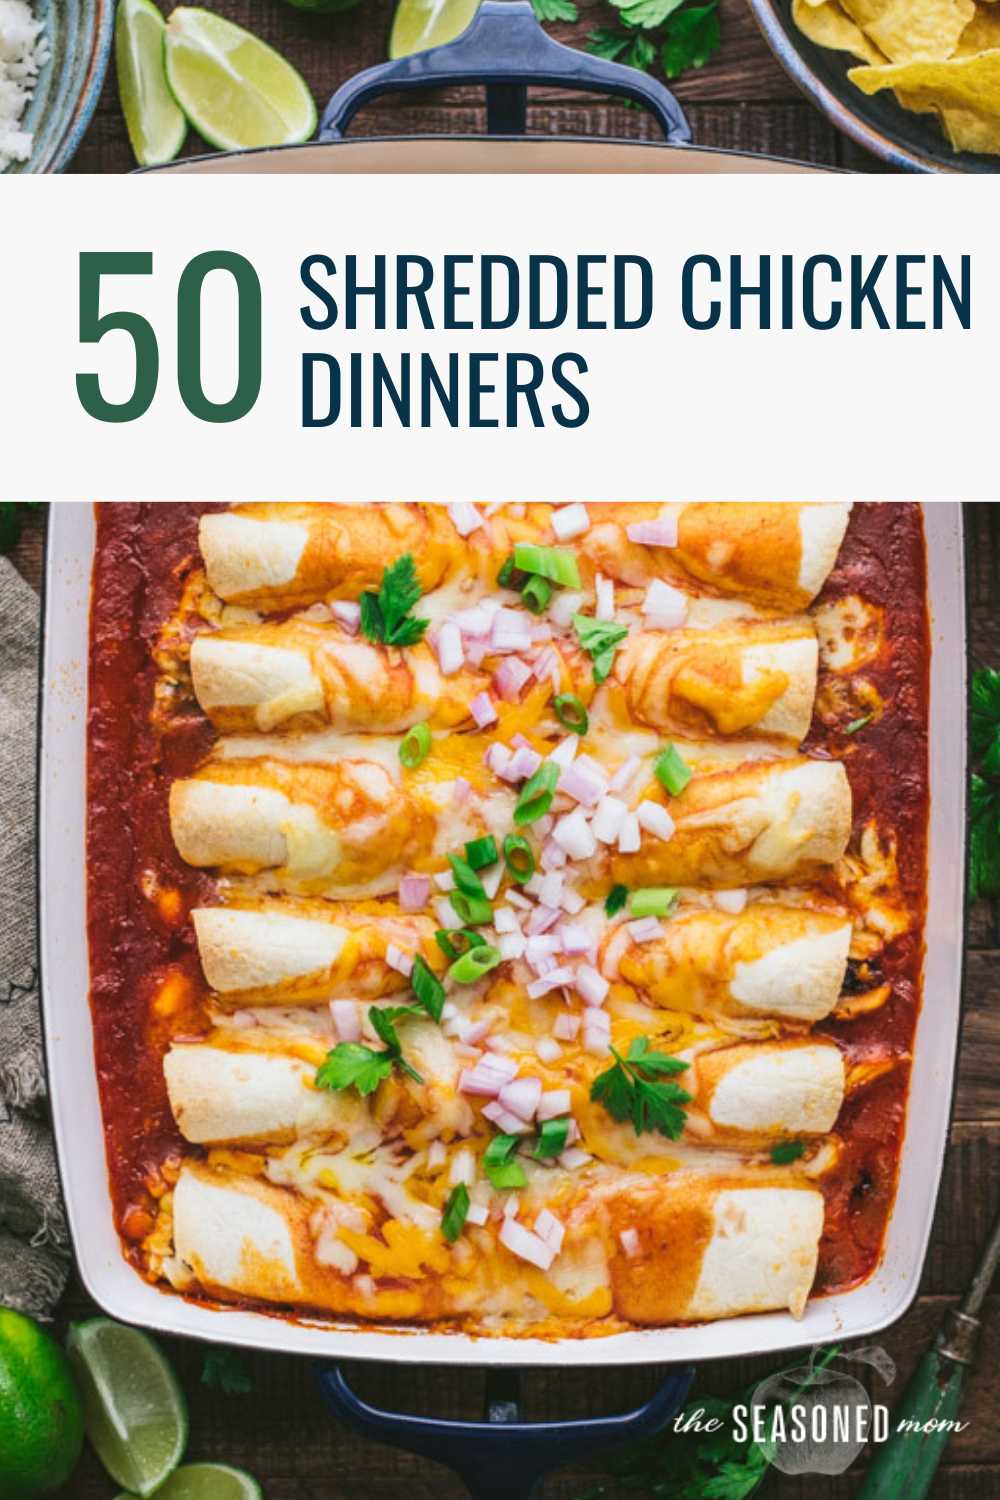 Chicken enchiladas in a collage image of easy shredded chicken meals.